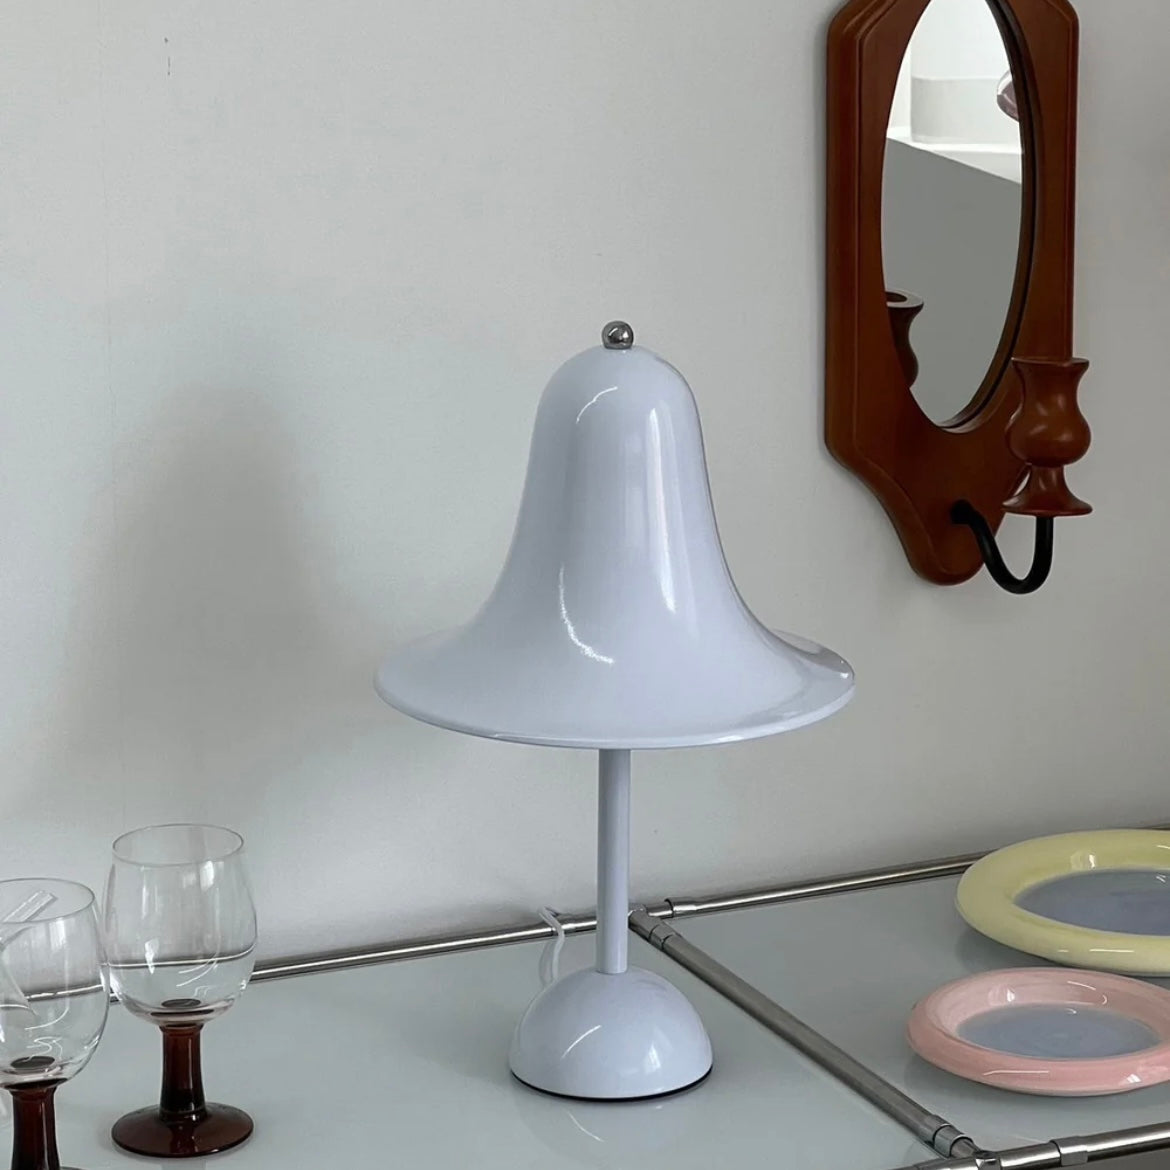 R37 pointed hat lamp